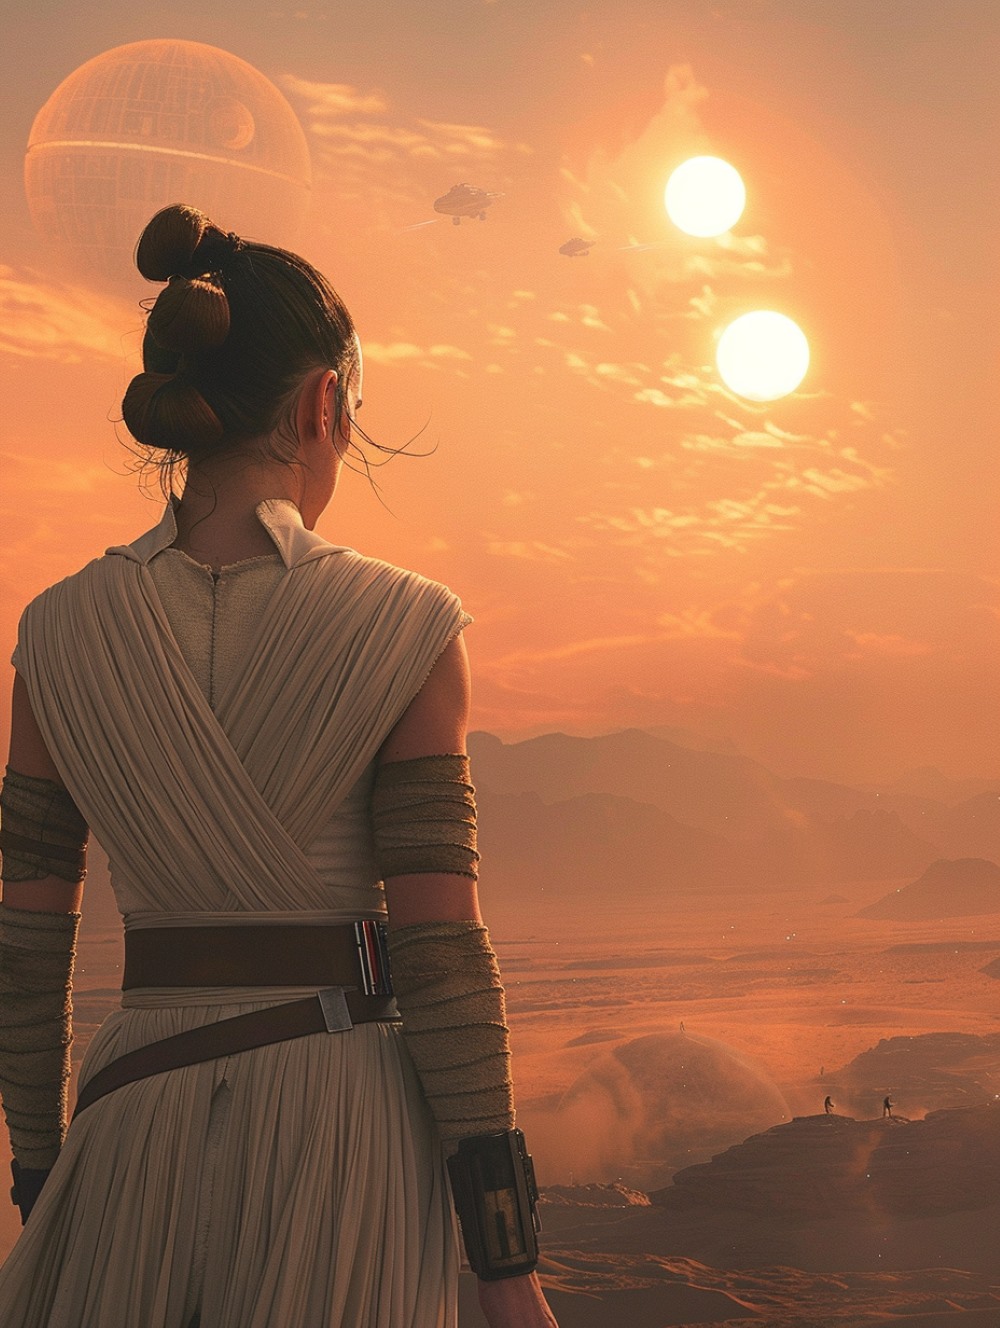 Rey is looking at a sunset landscape